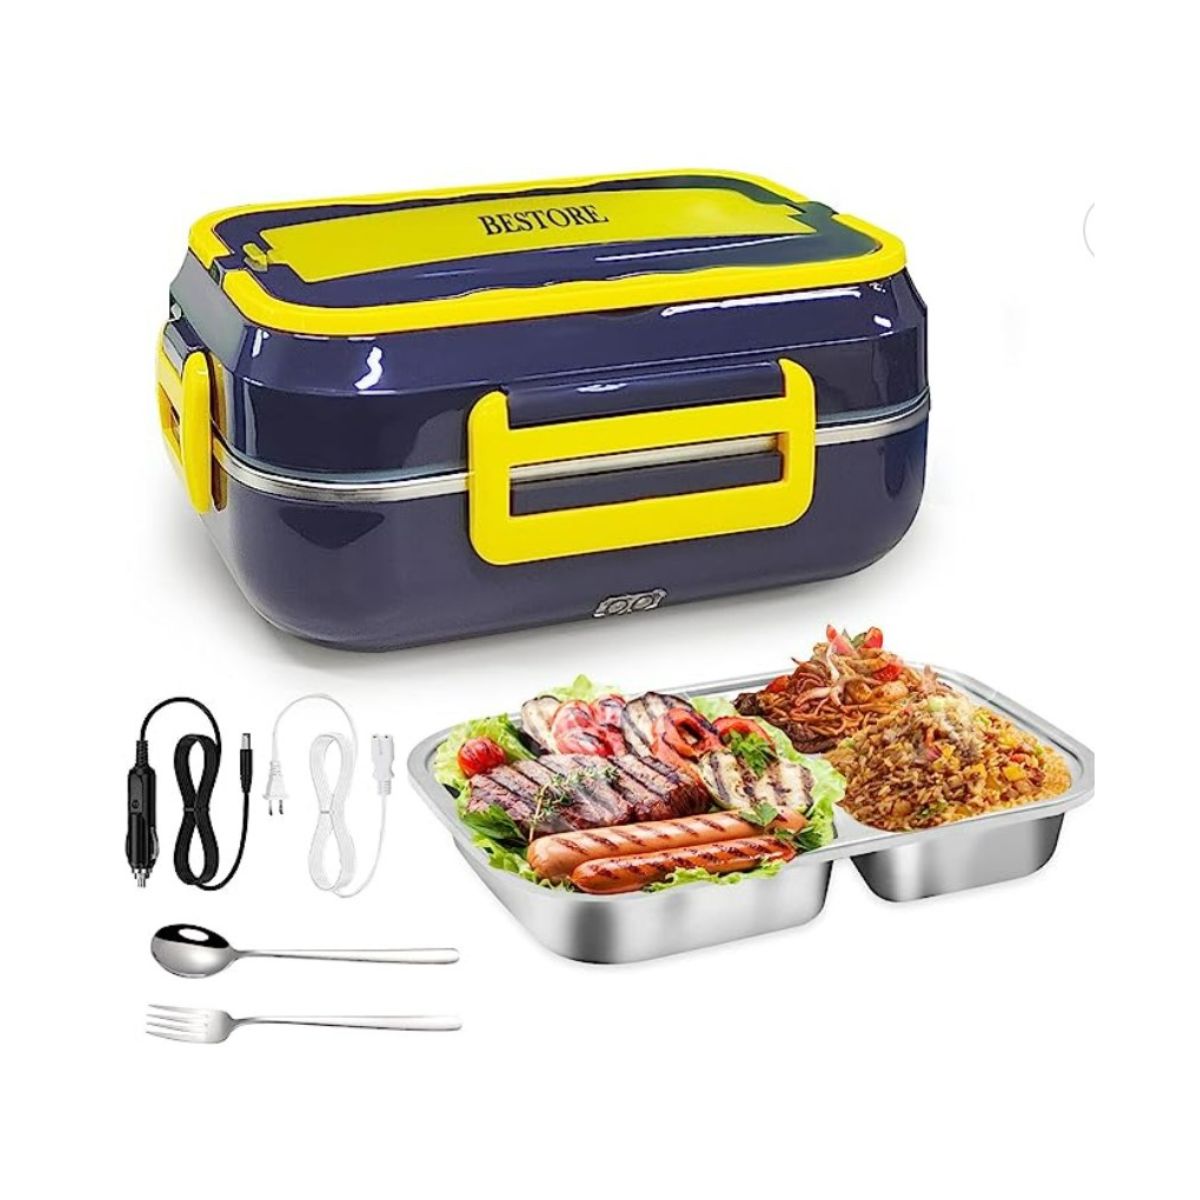 Bestore blue and yellow electric lunch box